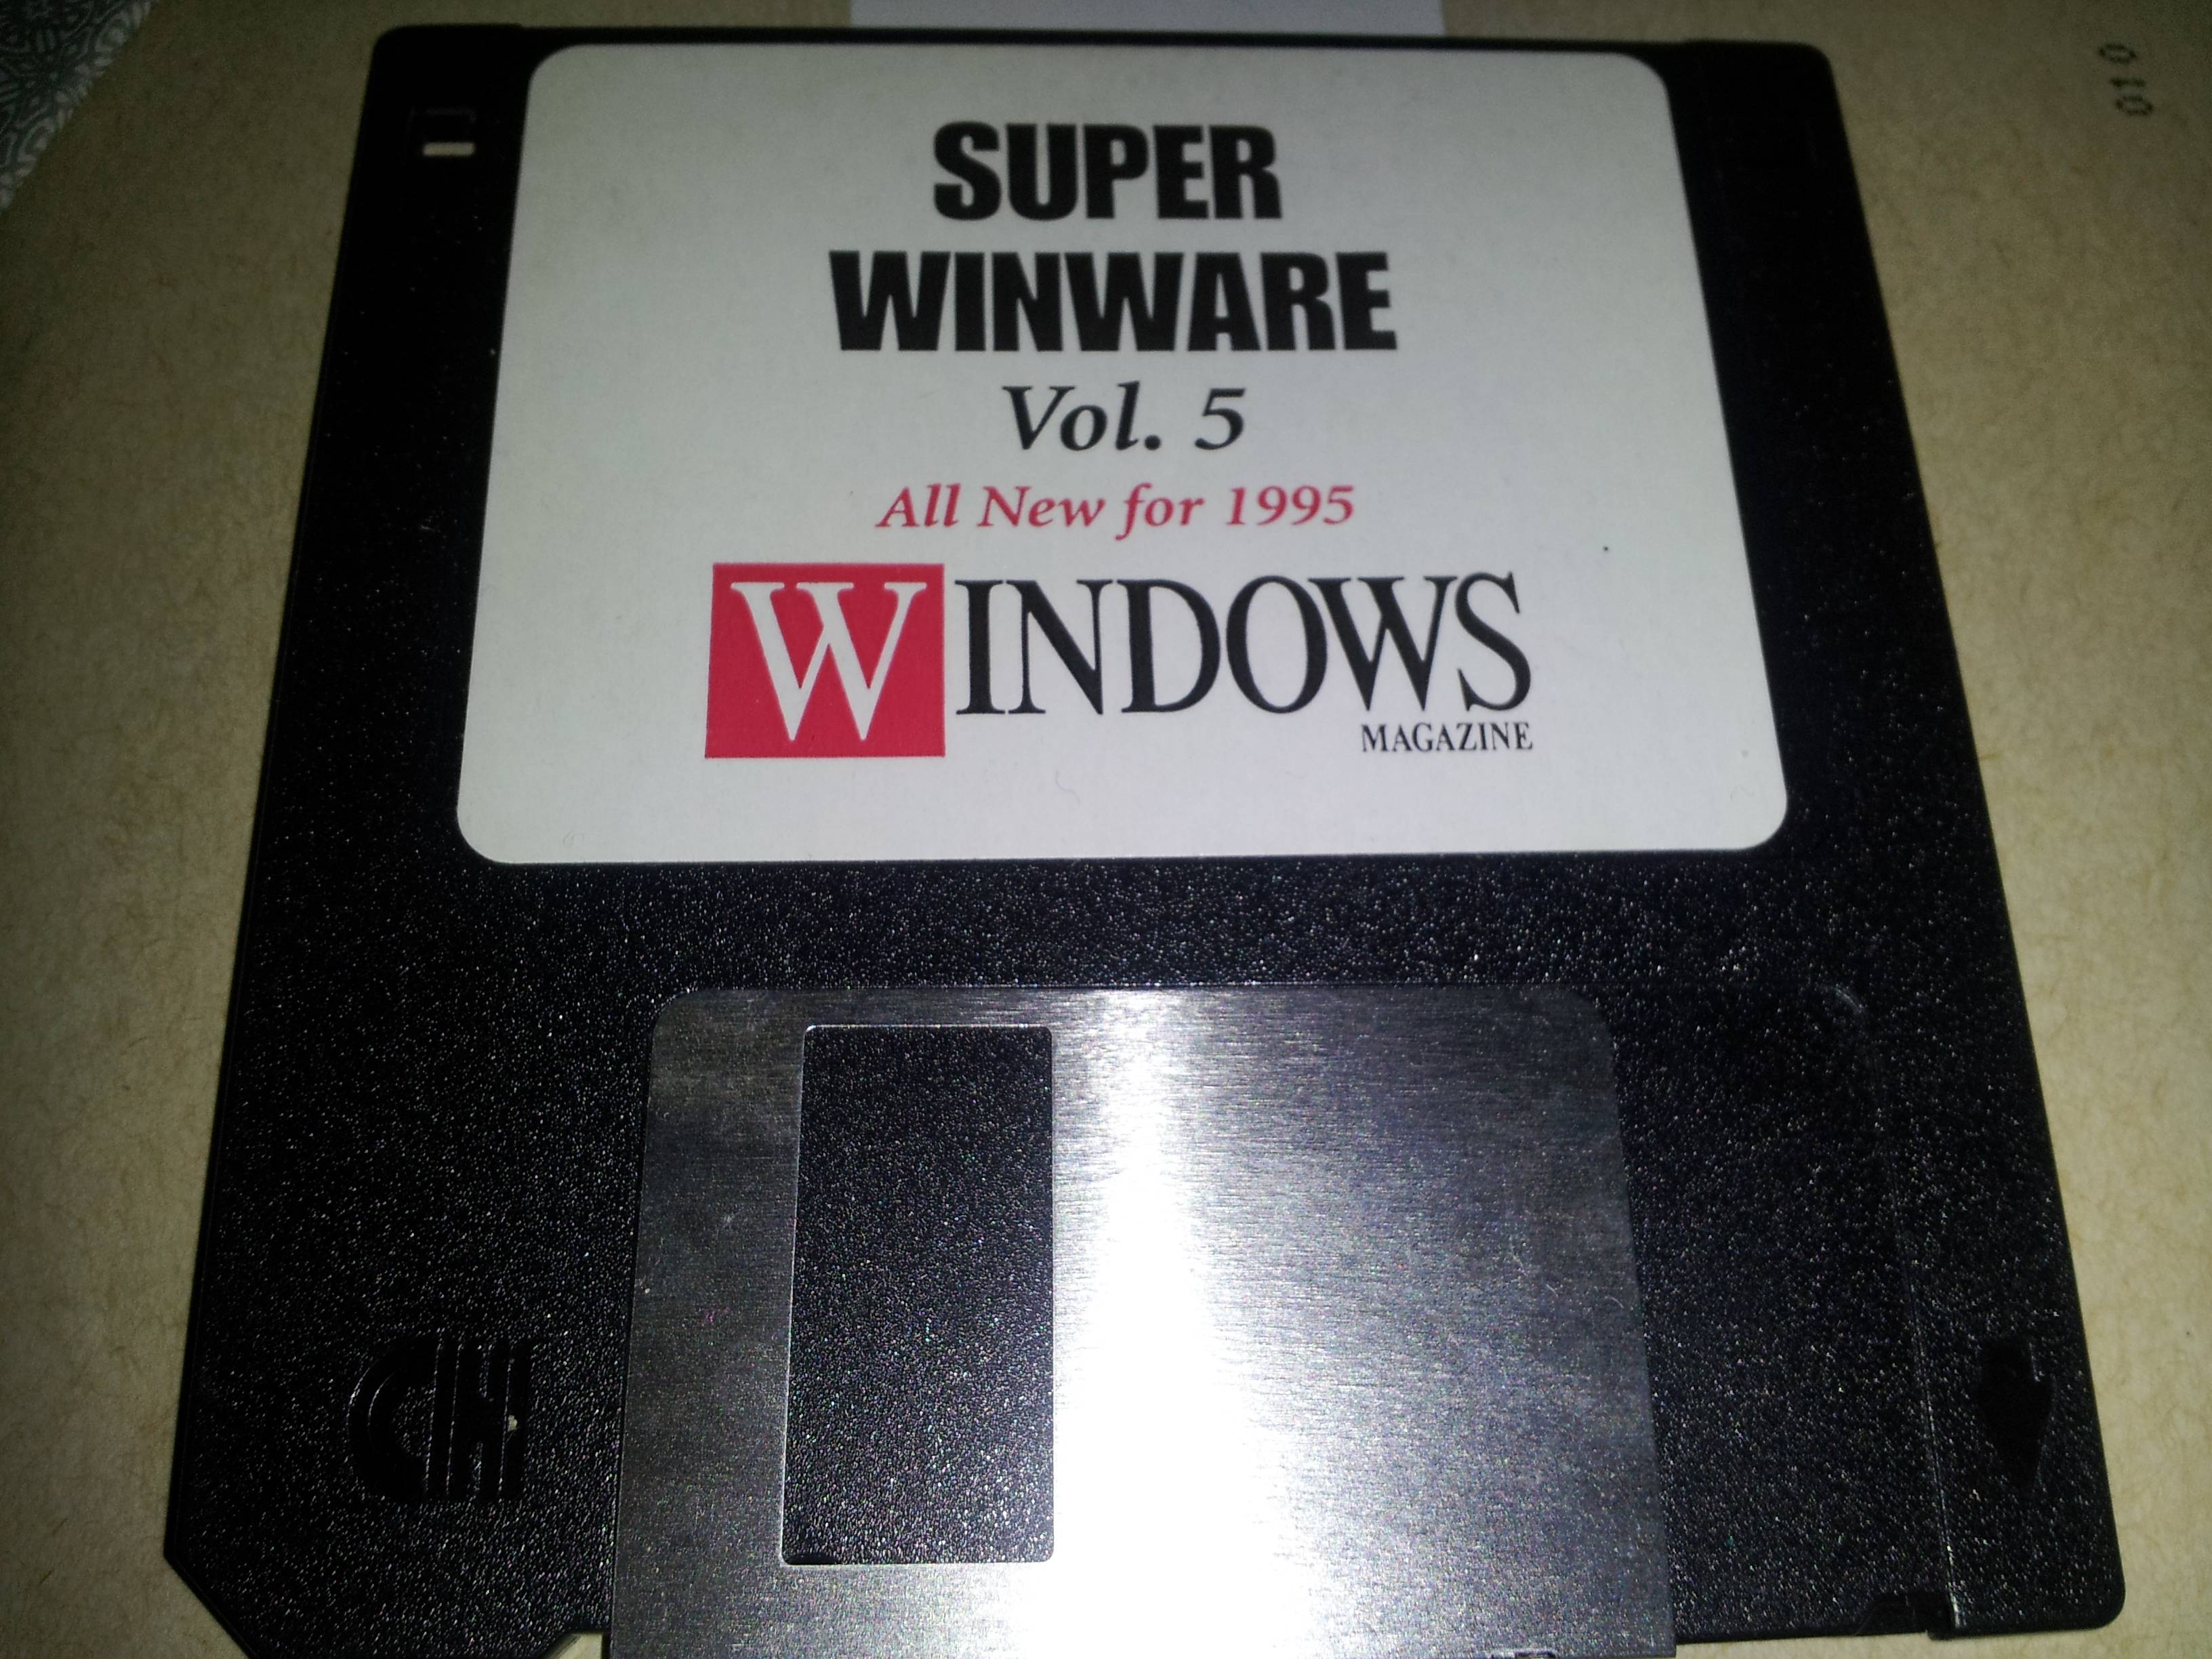 Win95 floppy disk images